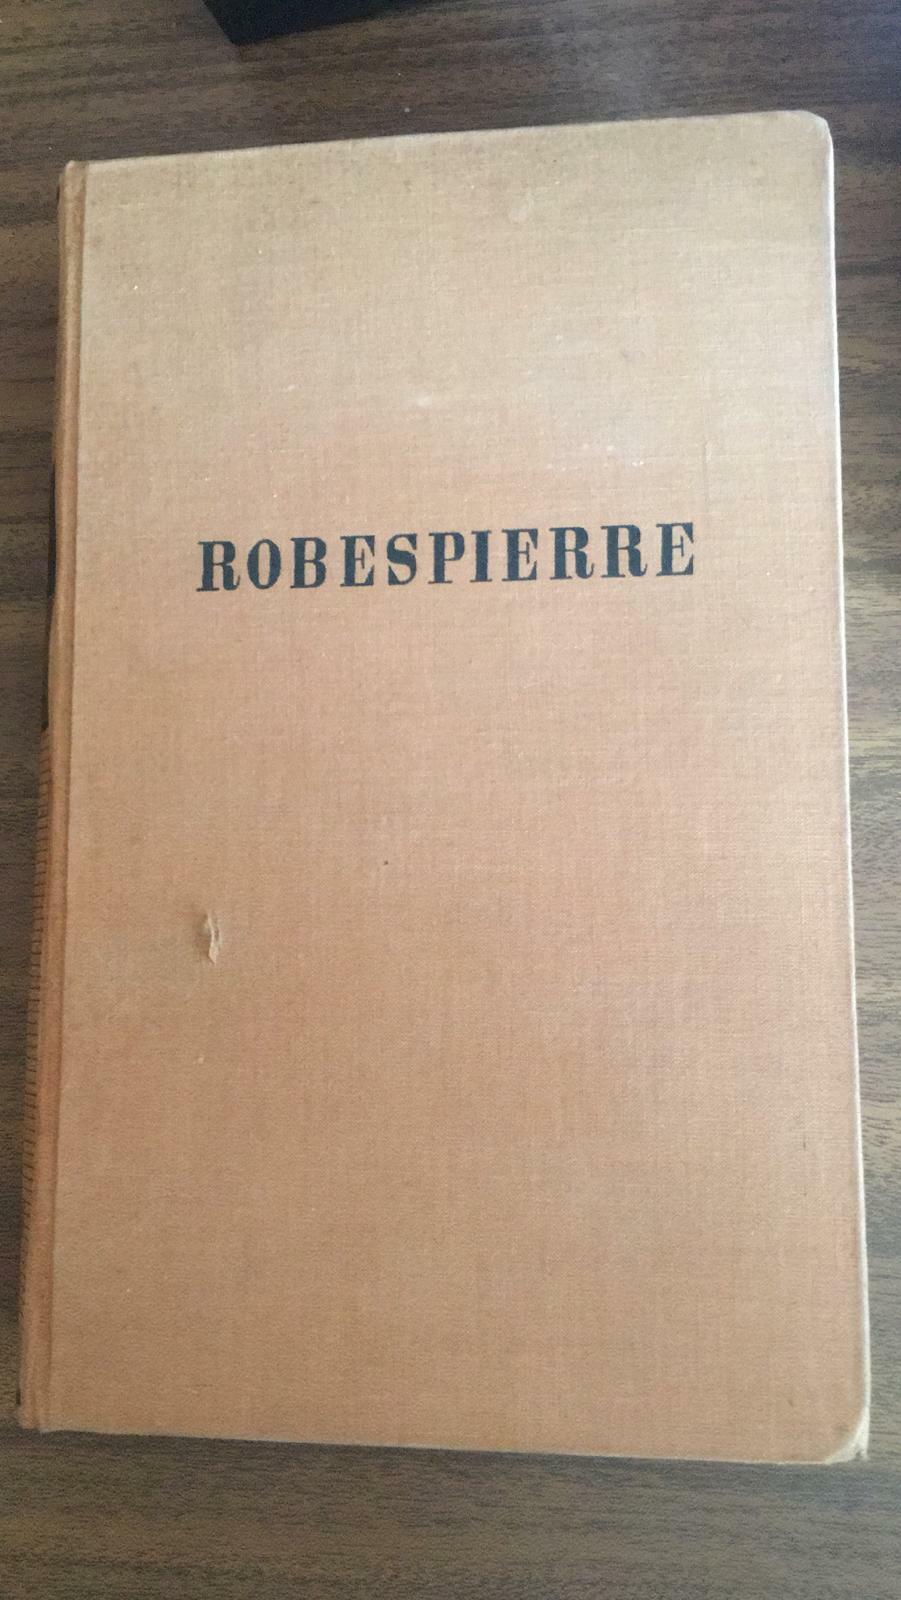 Robespierre - Peter Richard Roheden,  Holle & Co. - P